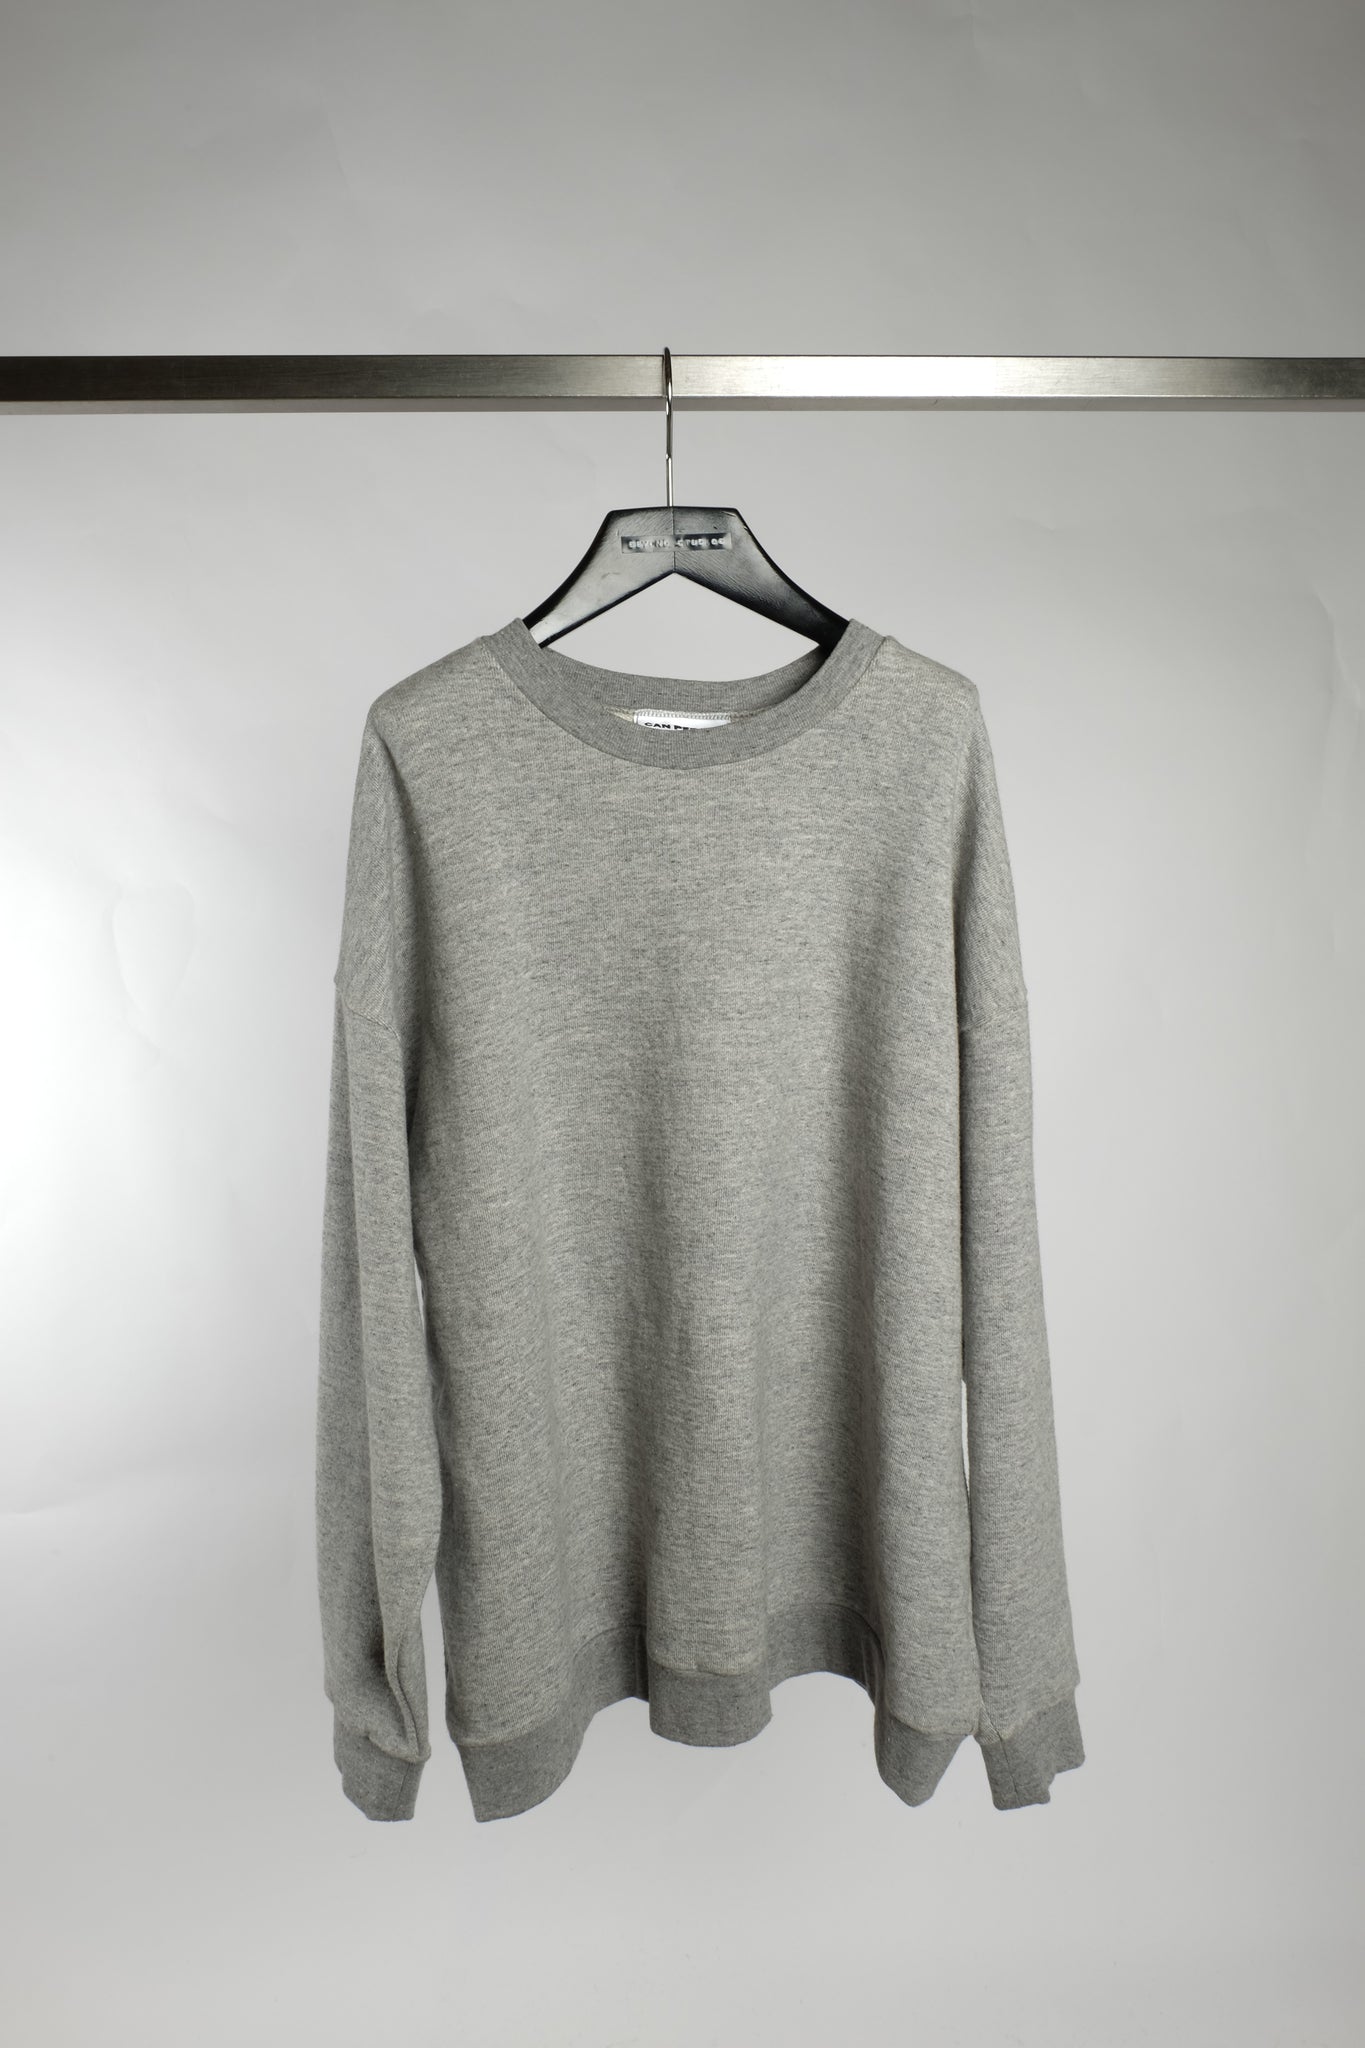 CLASSIC UNISEX SWEATER JAPANESE JERSEY IN GREY